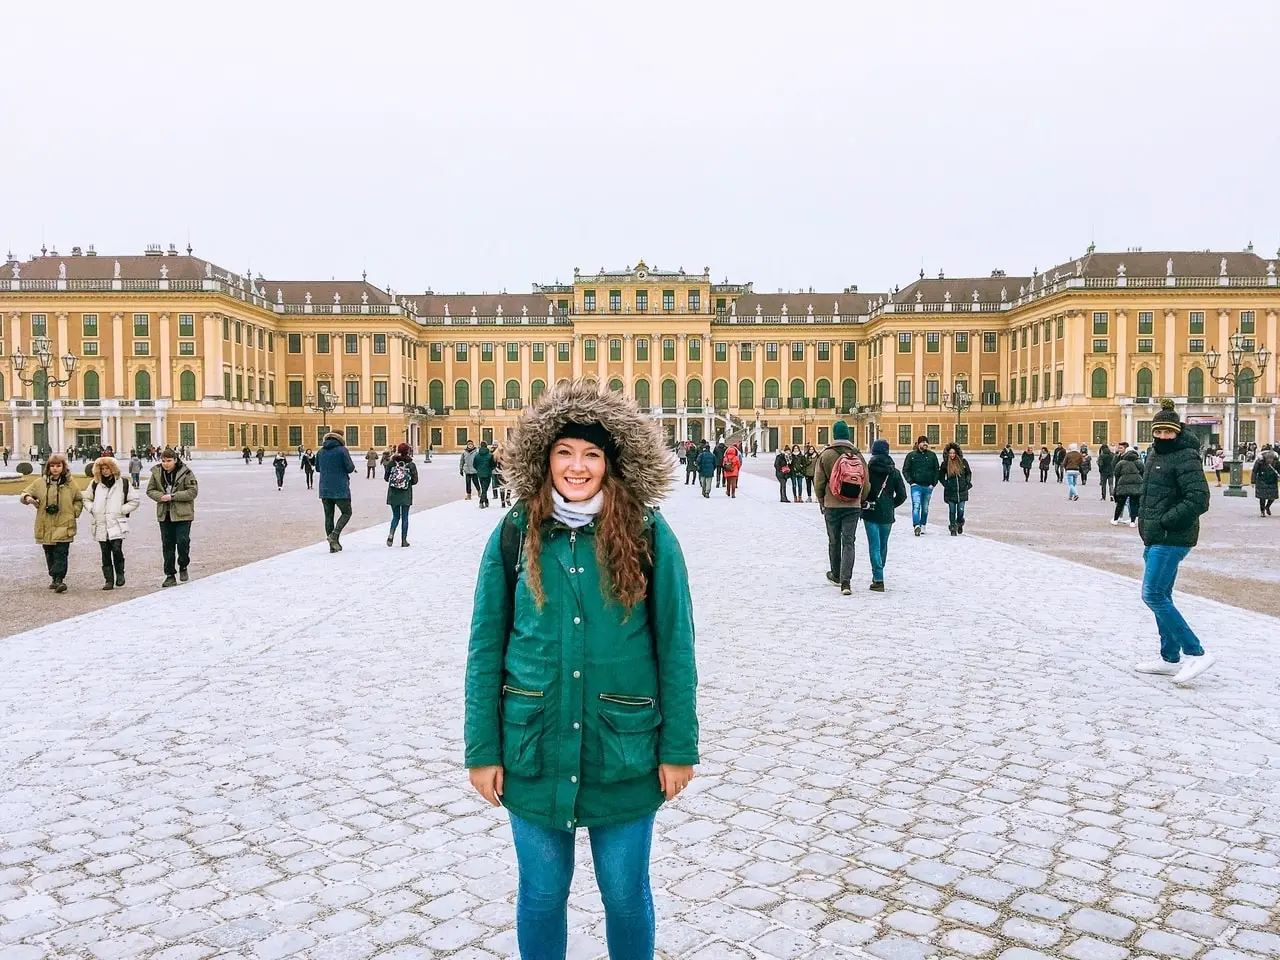 Schonbrunn Palace should be on every itinerary for 2 or 3 days in Vienna austria